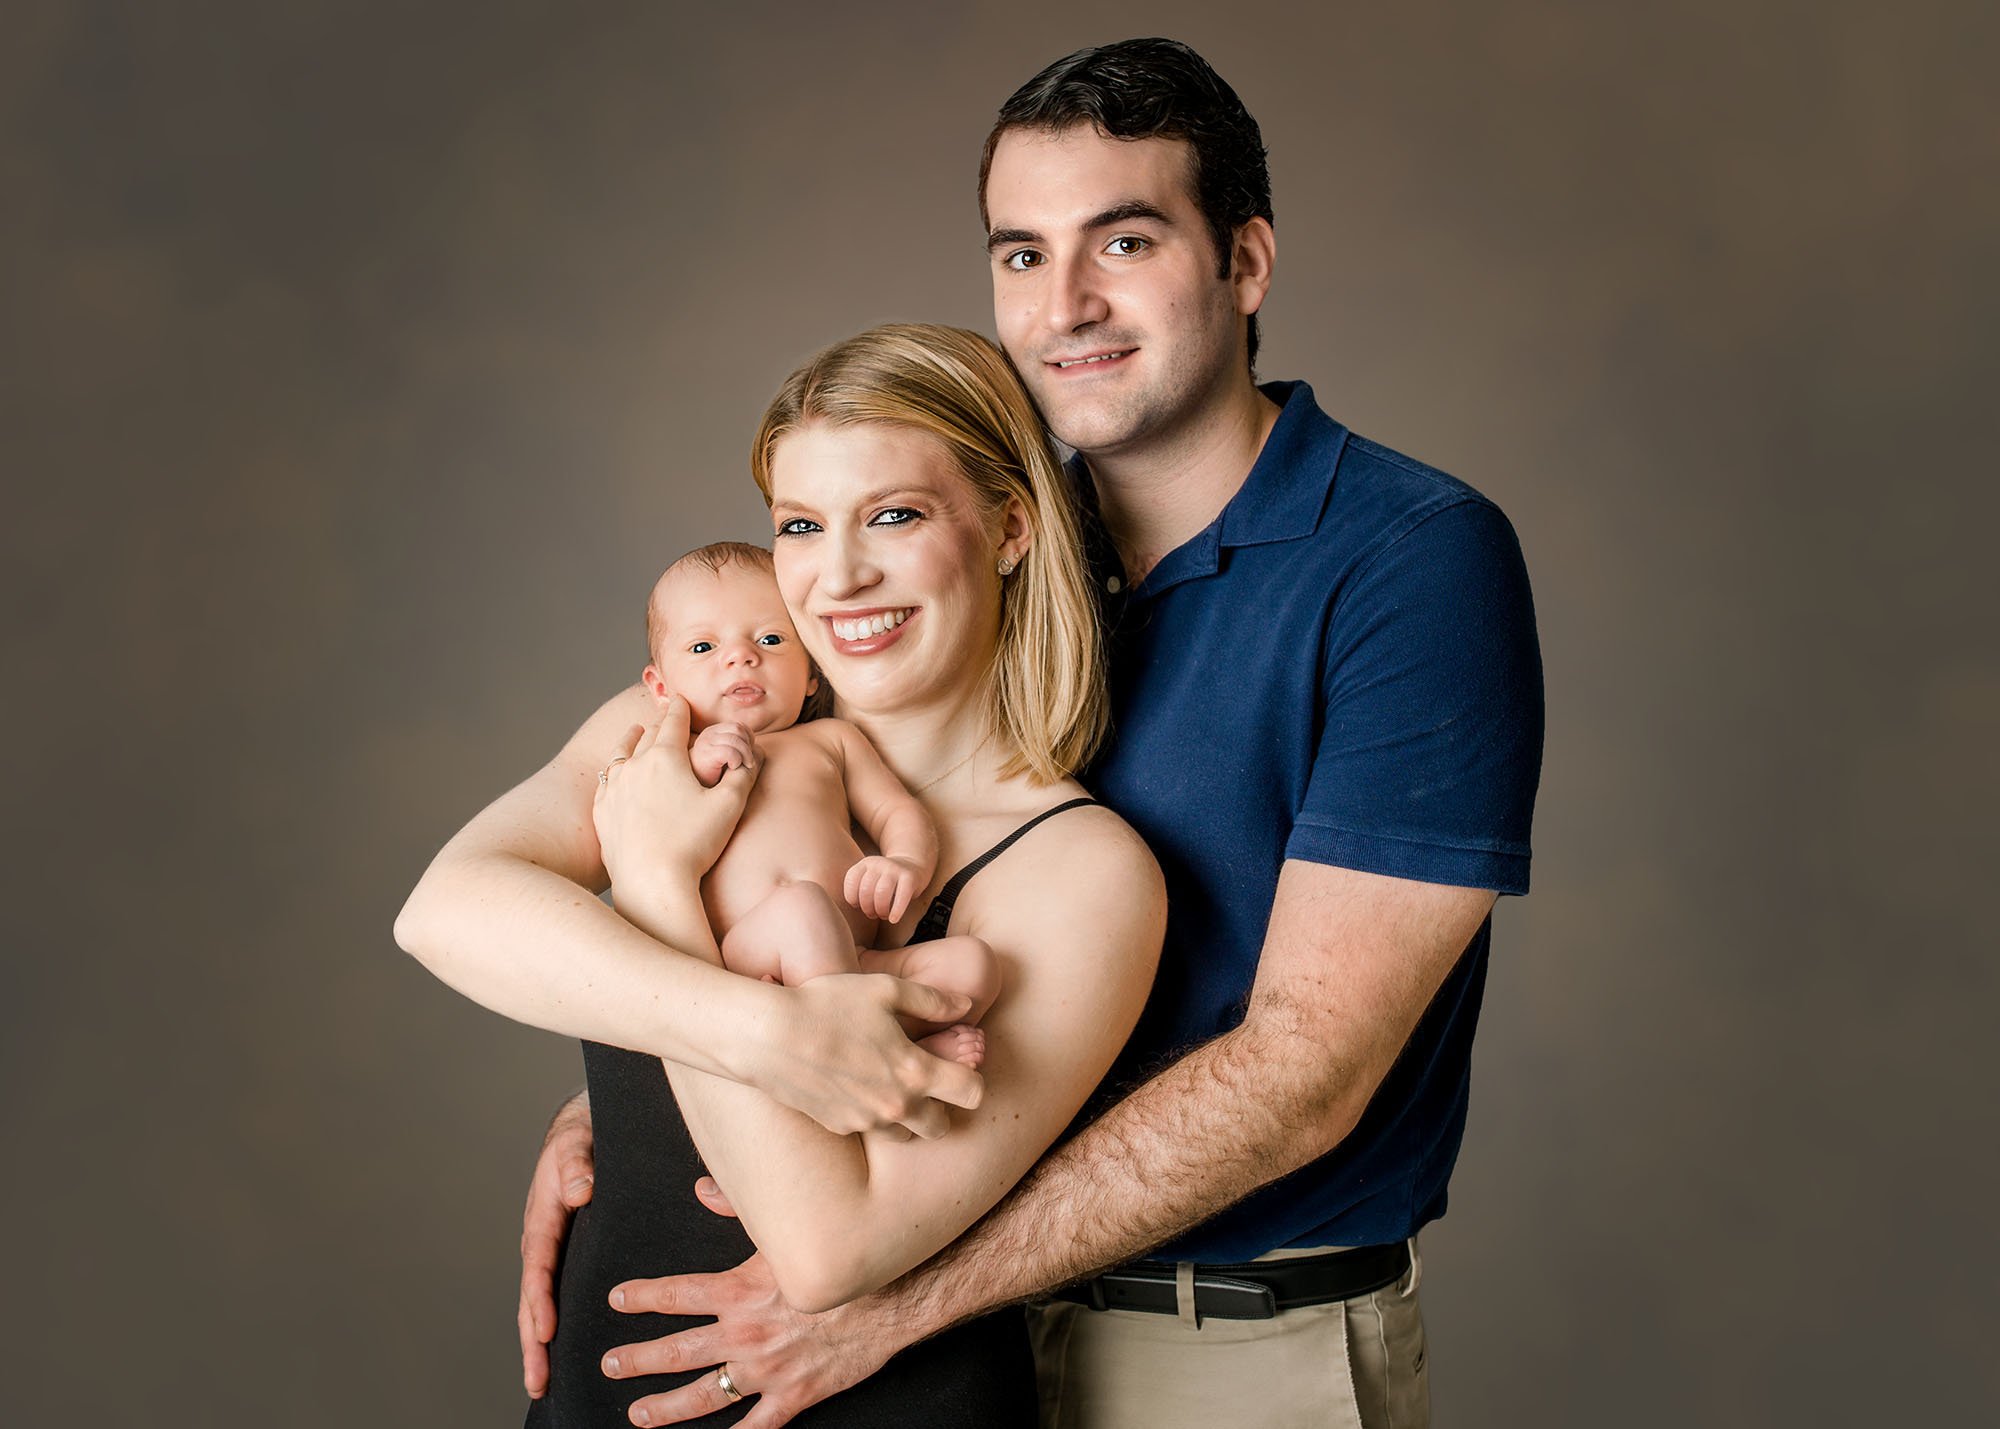 Family portrait with Dad, Mom and newborn baby on studio backdrop